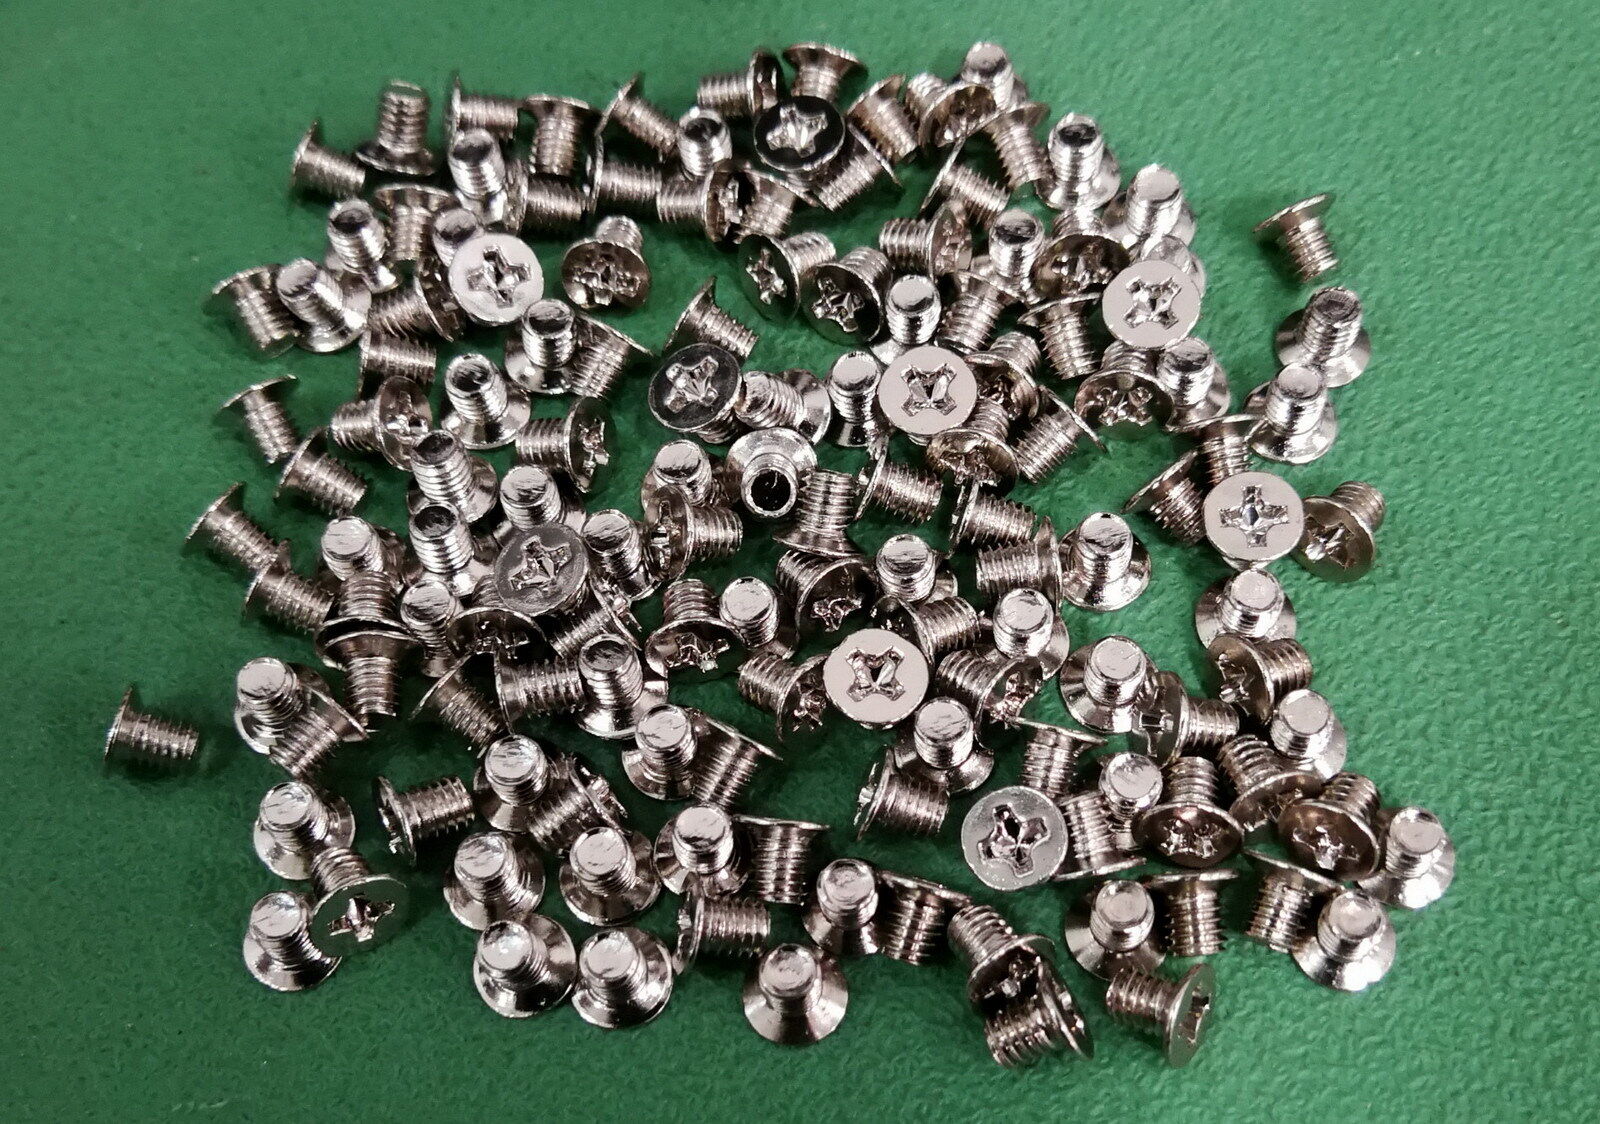 2.5" HDD Caddy Screws (Flat) for laptop, server/PC Chassis and HDD Tray, 210 PC Unbranded Does Not Apply